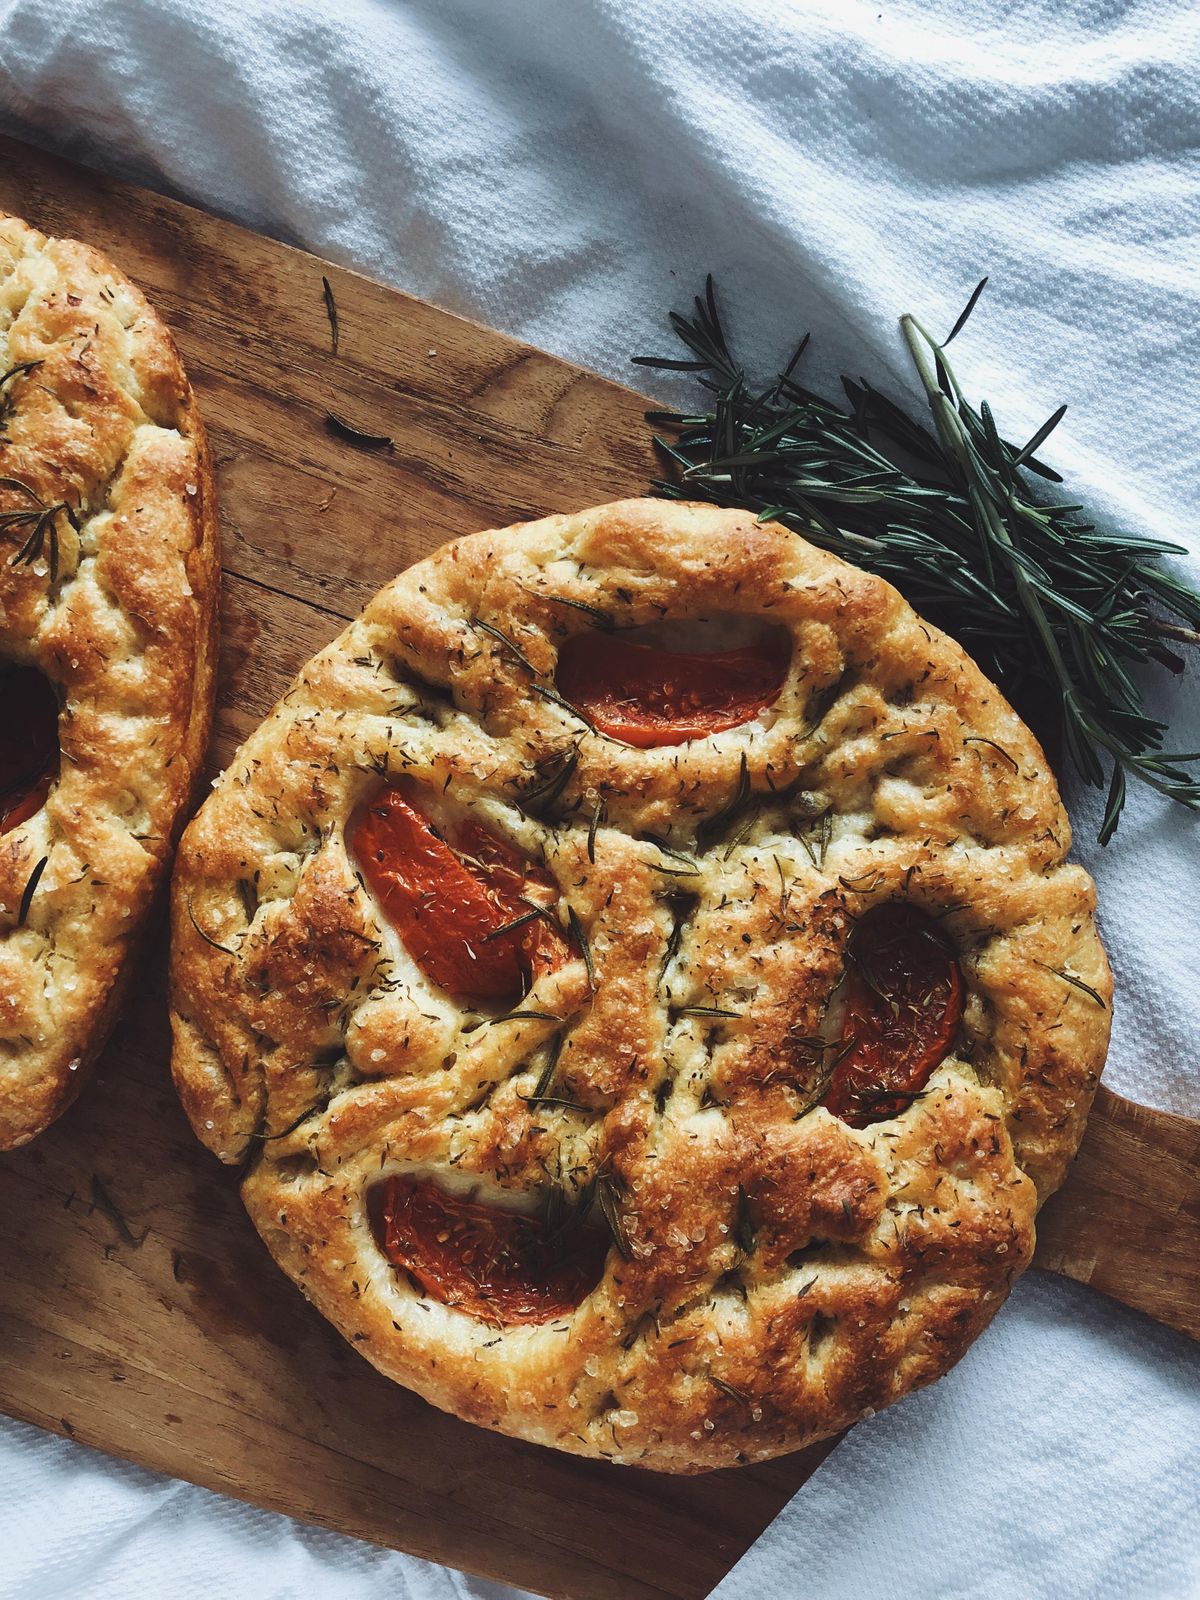 ONLINE BAKING WORKSHOP: Learn How To Bake Focaccia Barese